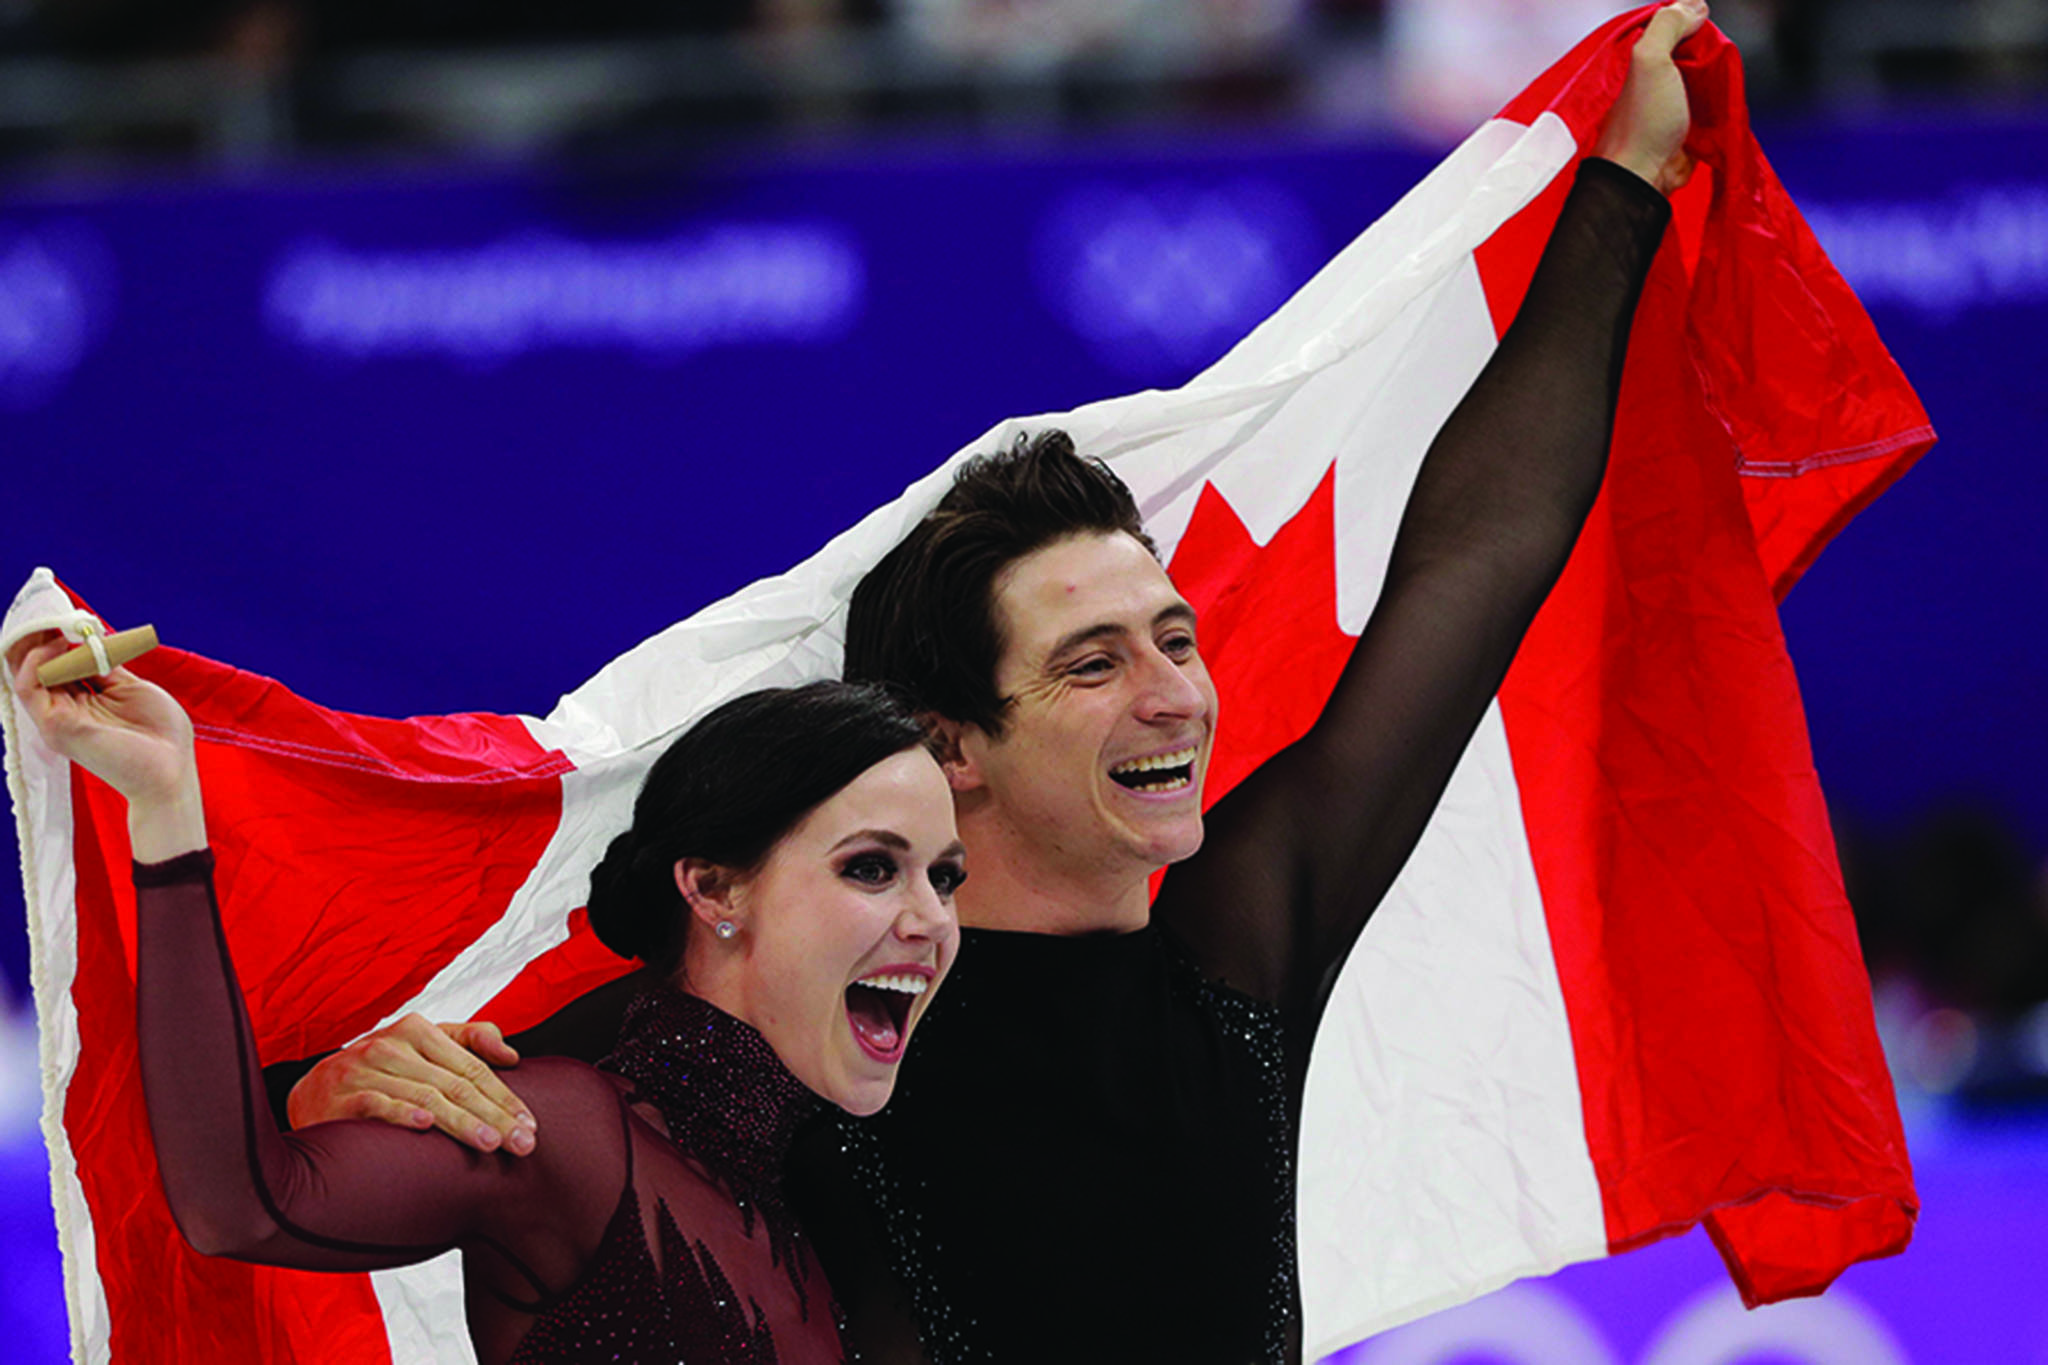 Tessa Virtue and Scott Moir of Canada celebrate during the venue ceremony after winning the ice dance, free dance figure skating final in the Gangneung Ice Arena at the 2018 Winter Olympics in Gangneung, South Korea, Tuesday, Feb. 20, 2018. (AP Photo/David J. Phillip)